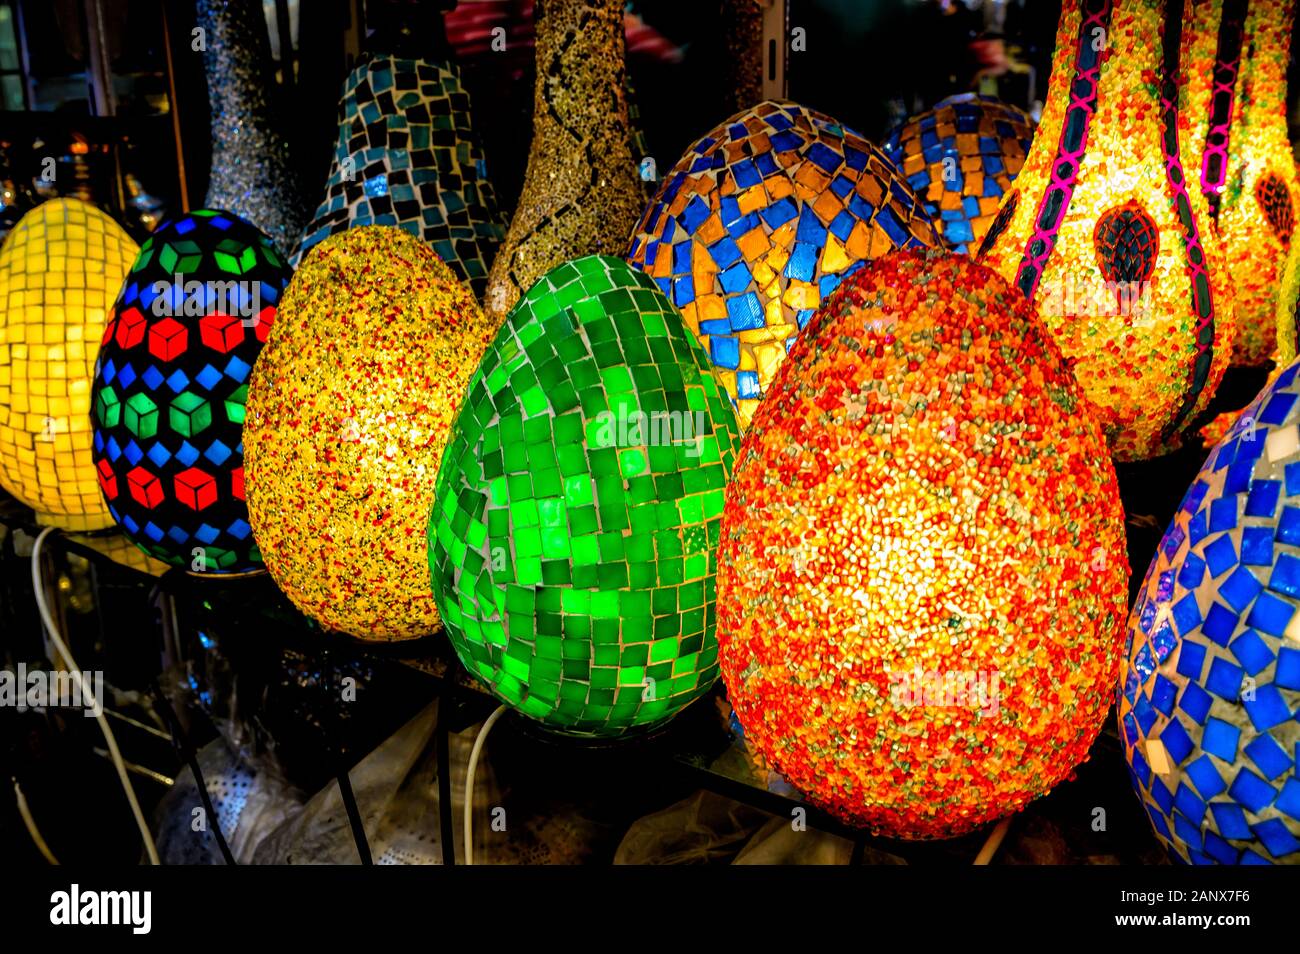 Decorative colored lamps on sale in the Khan El Khalili market in Islamic Cairo Stock Photo